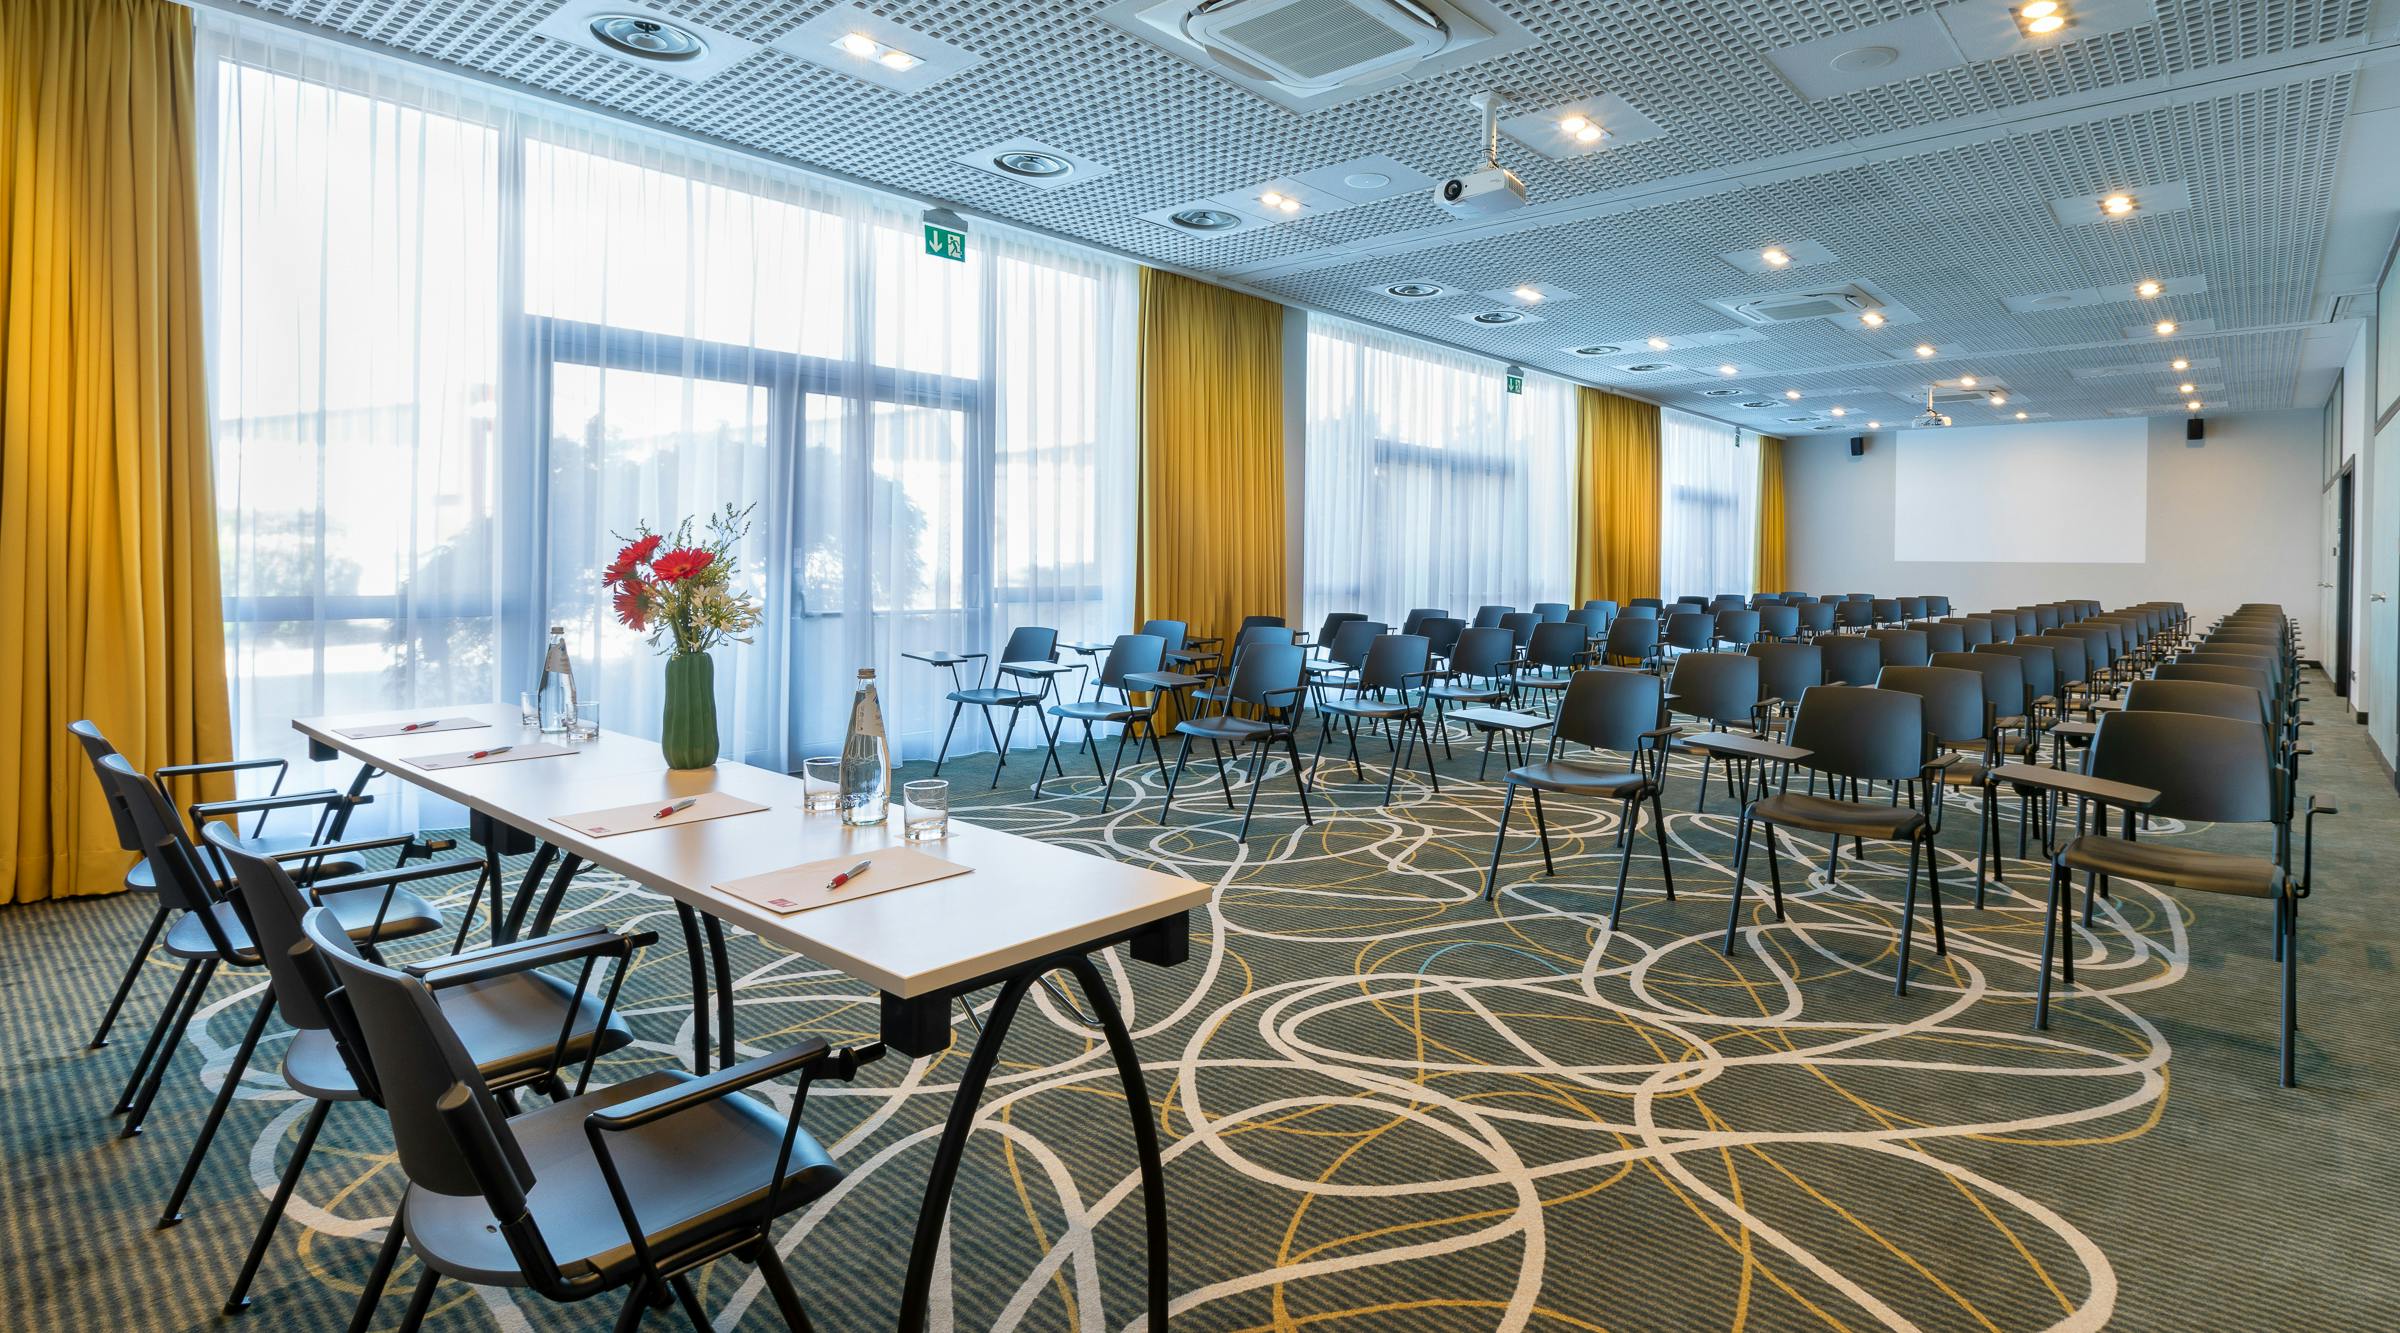 Meeting room with black chairs and table with flowers